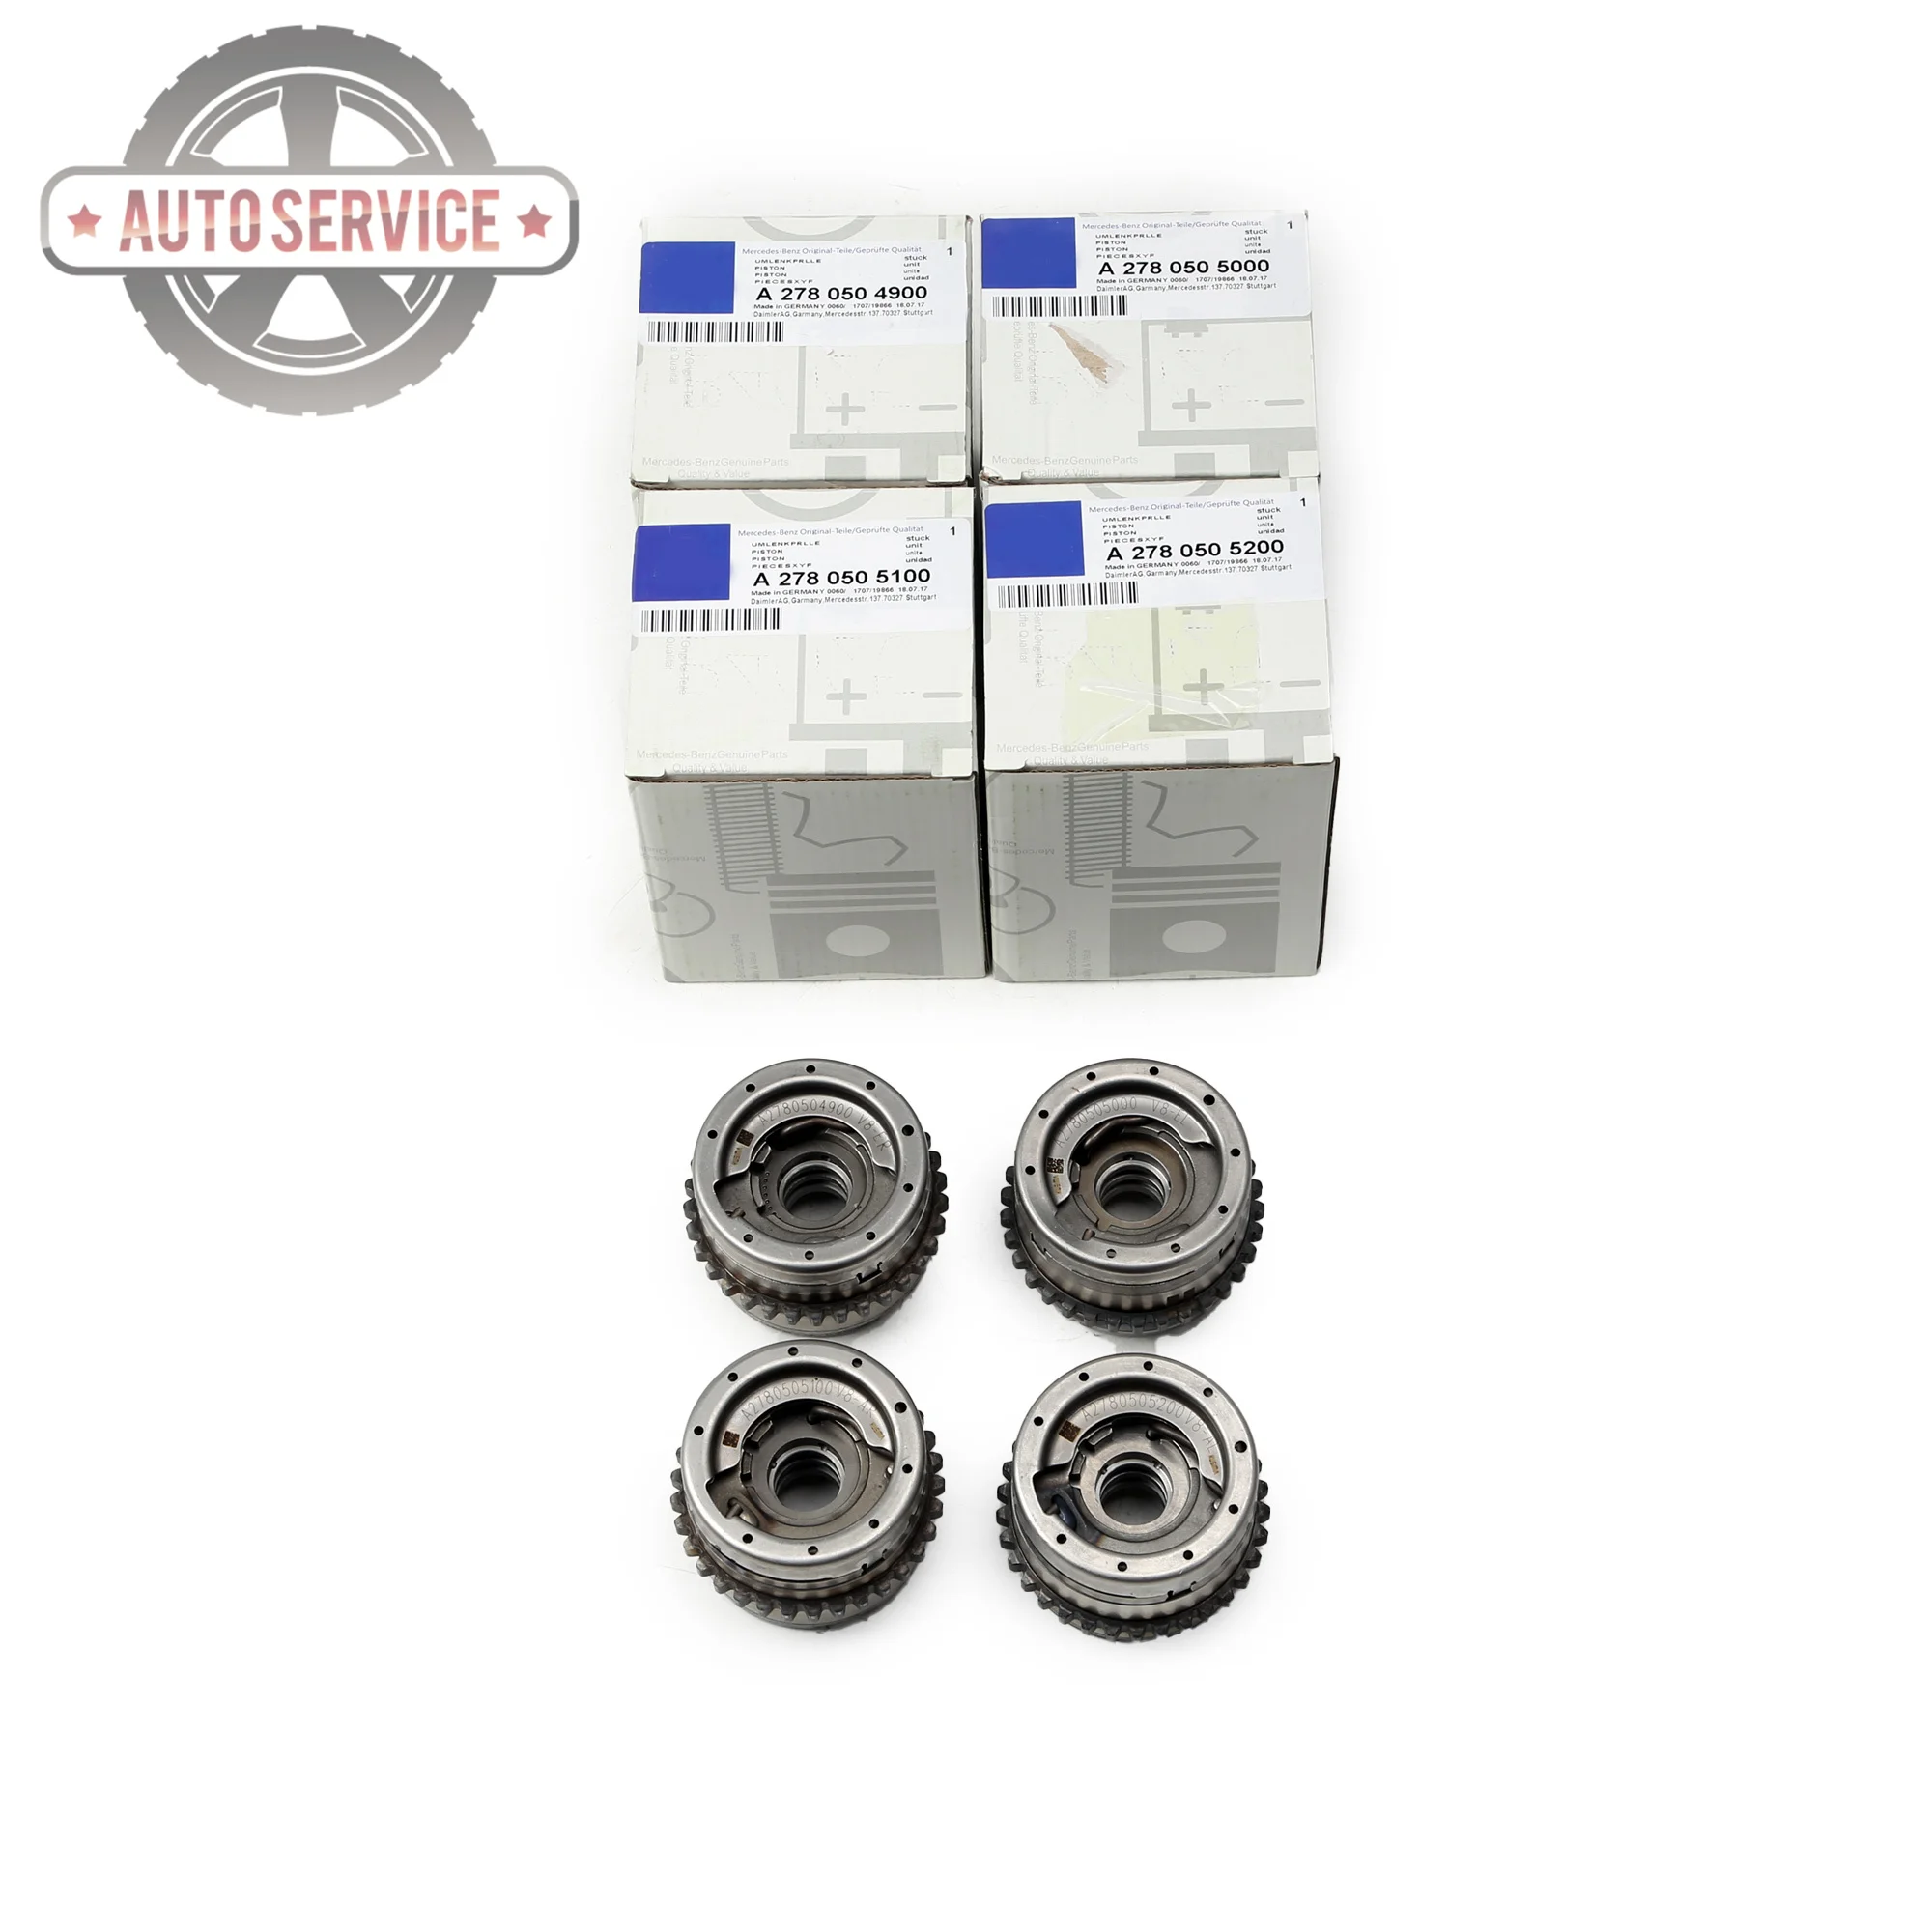 

A2780505000 A2780505100 Intake & Exhaust Camshaft Adjusters Kit For Benz E 63 AMG GLE 550 4-matic CL 500 SLK 55 AMG